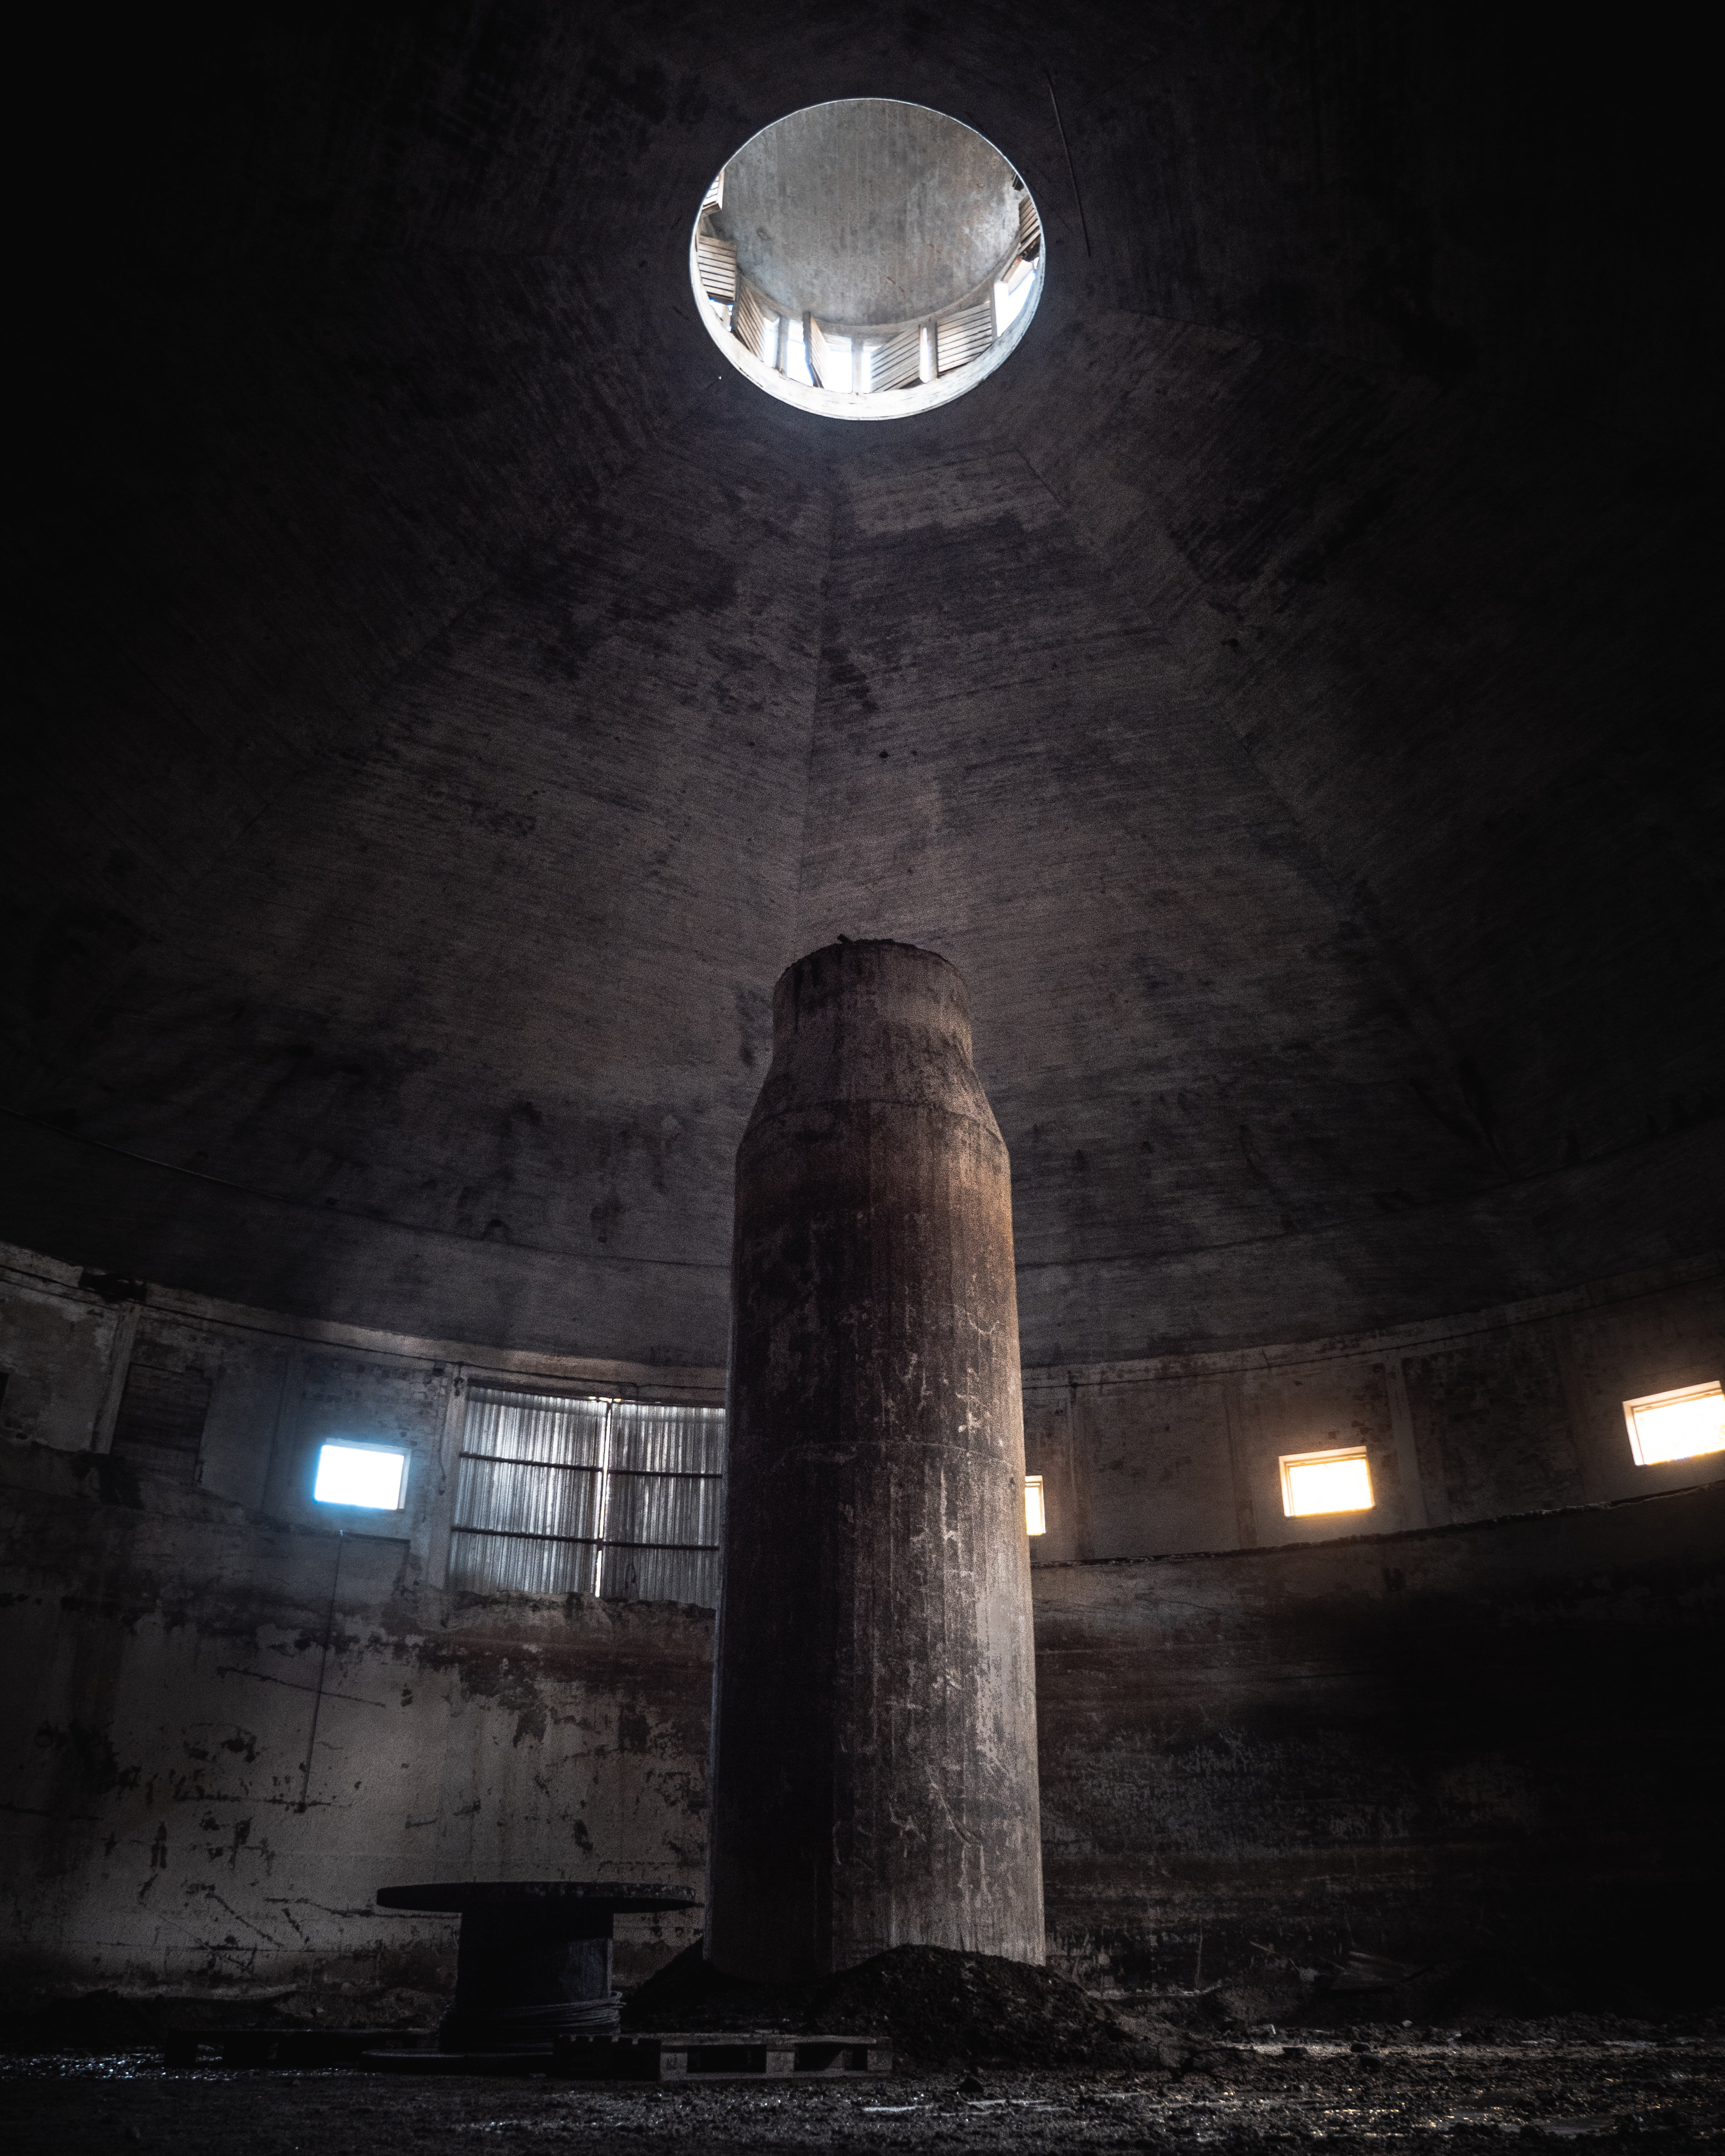 Empty silo. Light from the ceiling shining down.